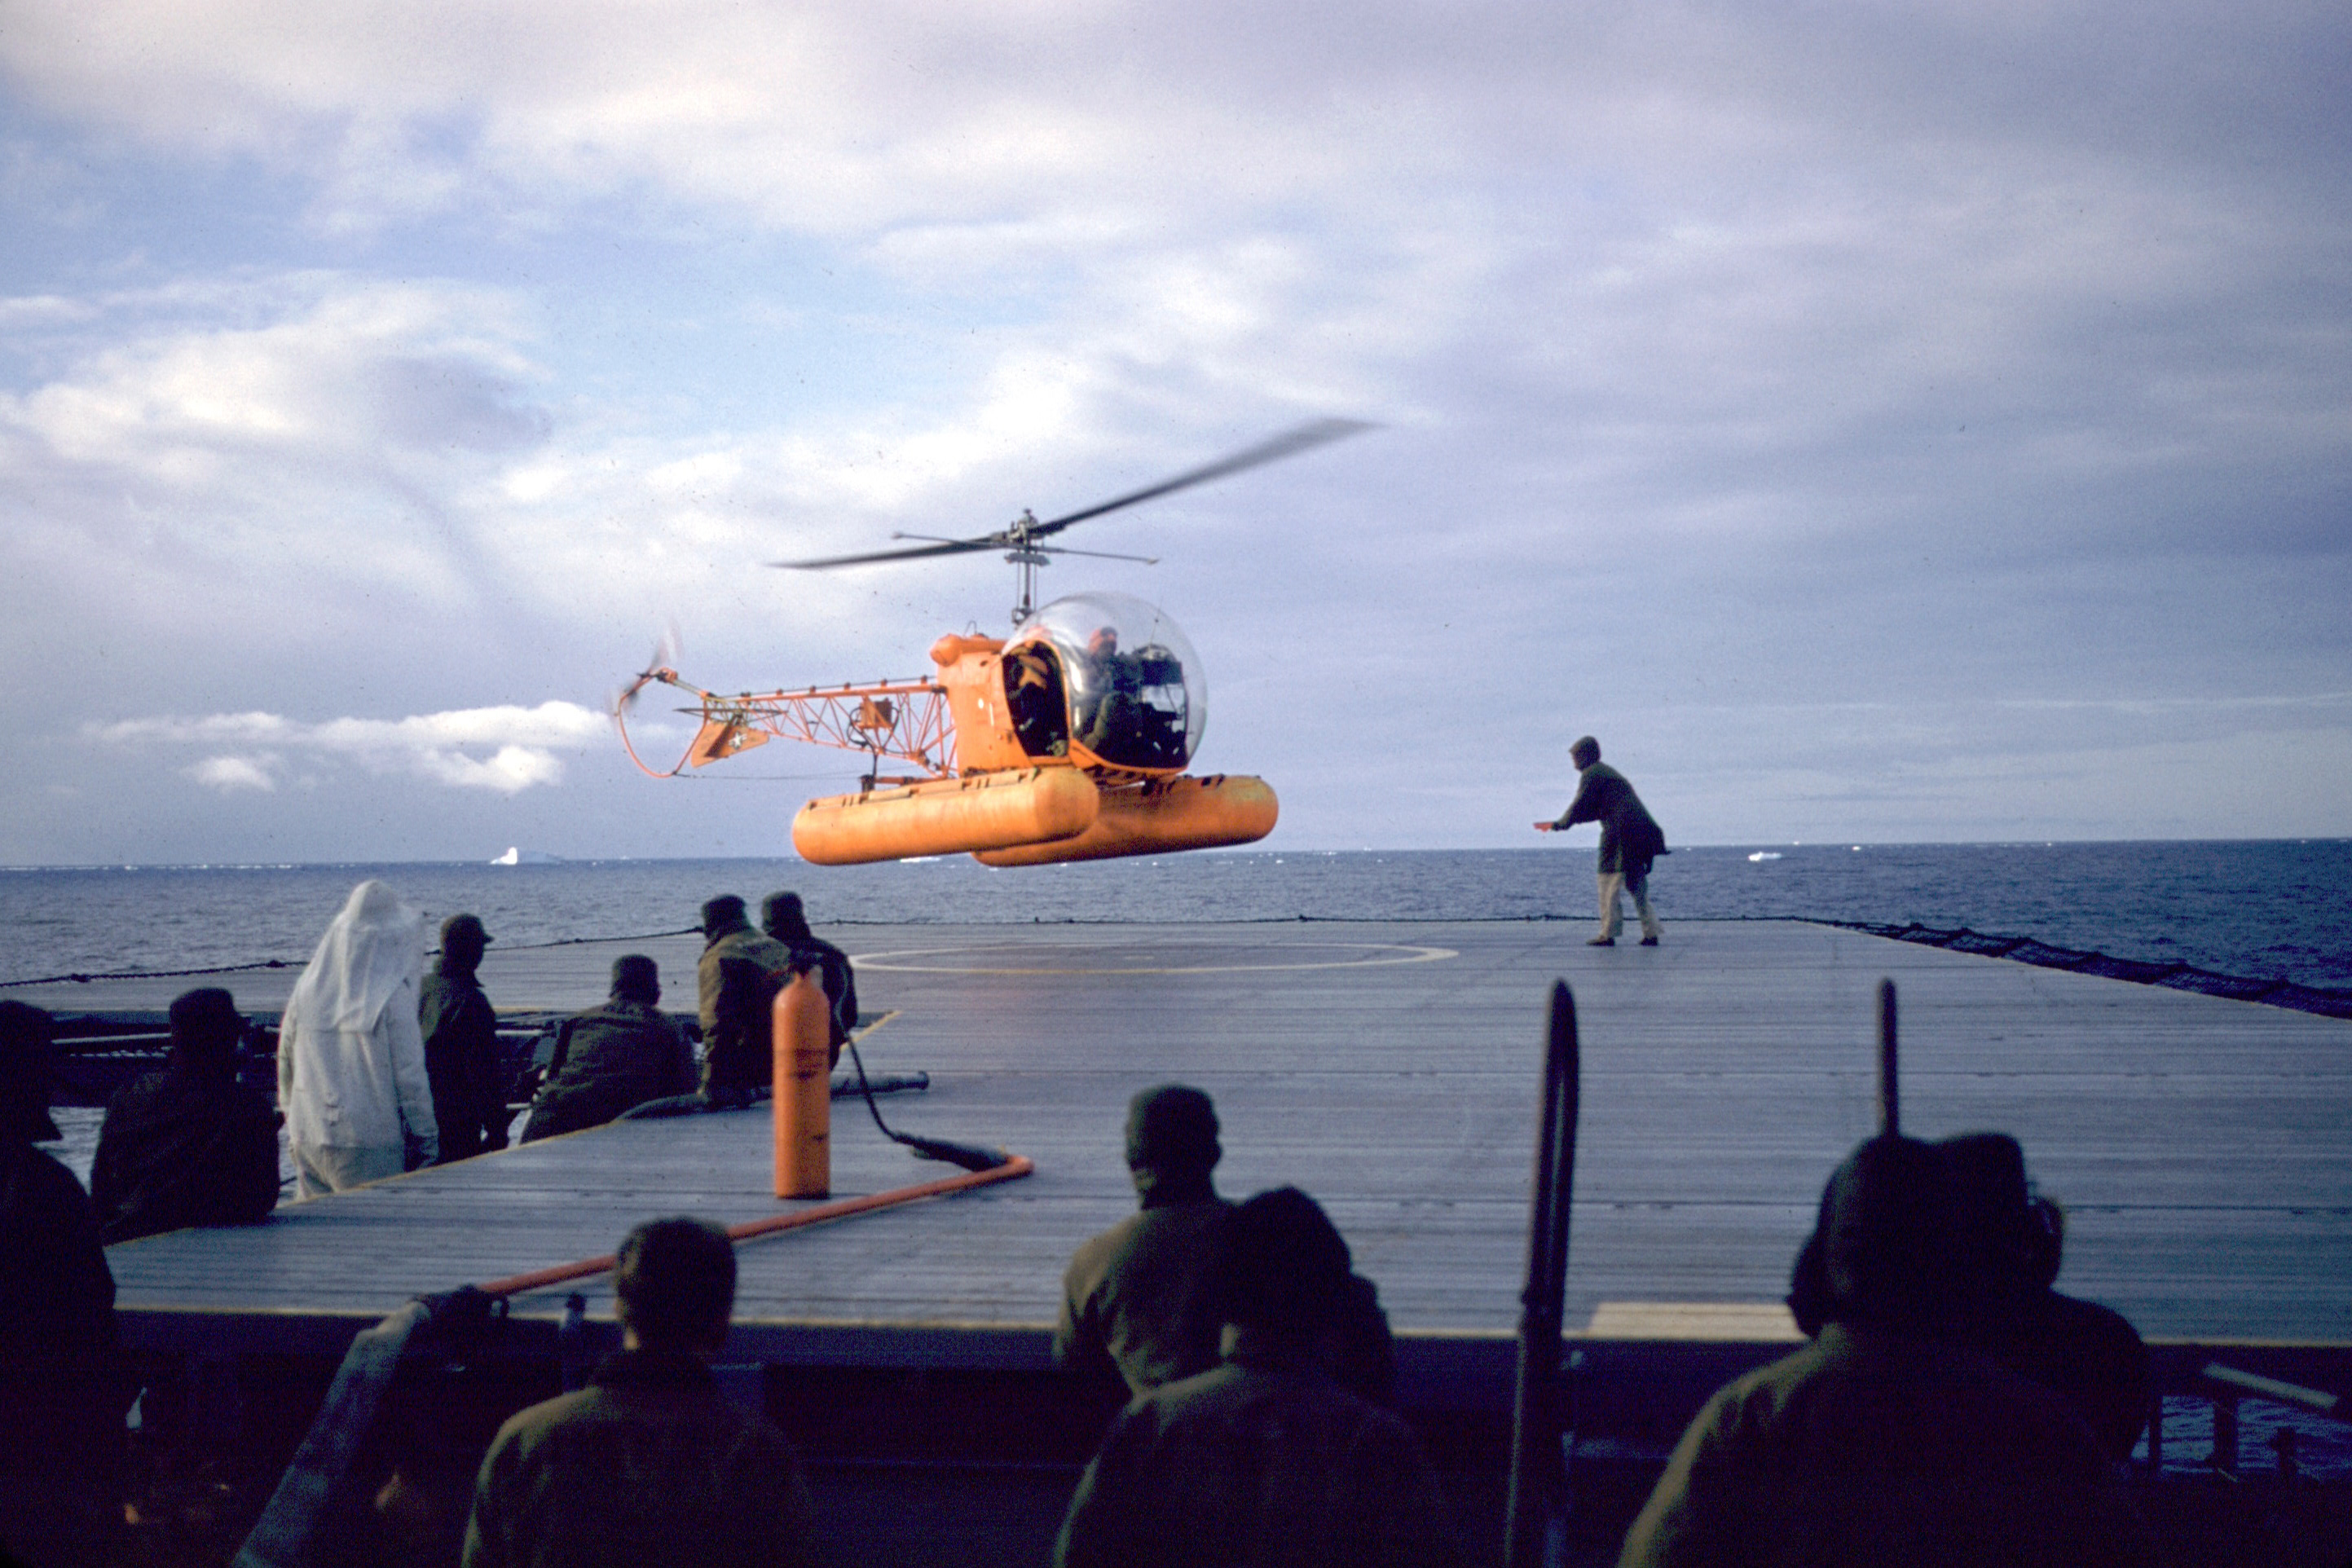 Helicopter lands on ship.